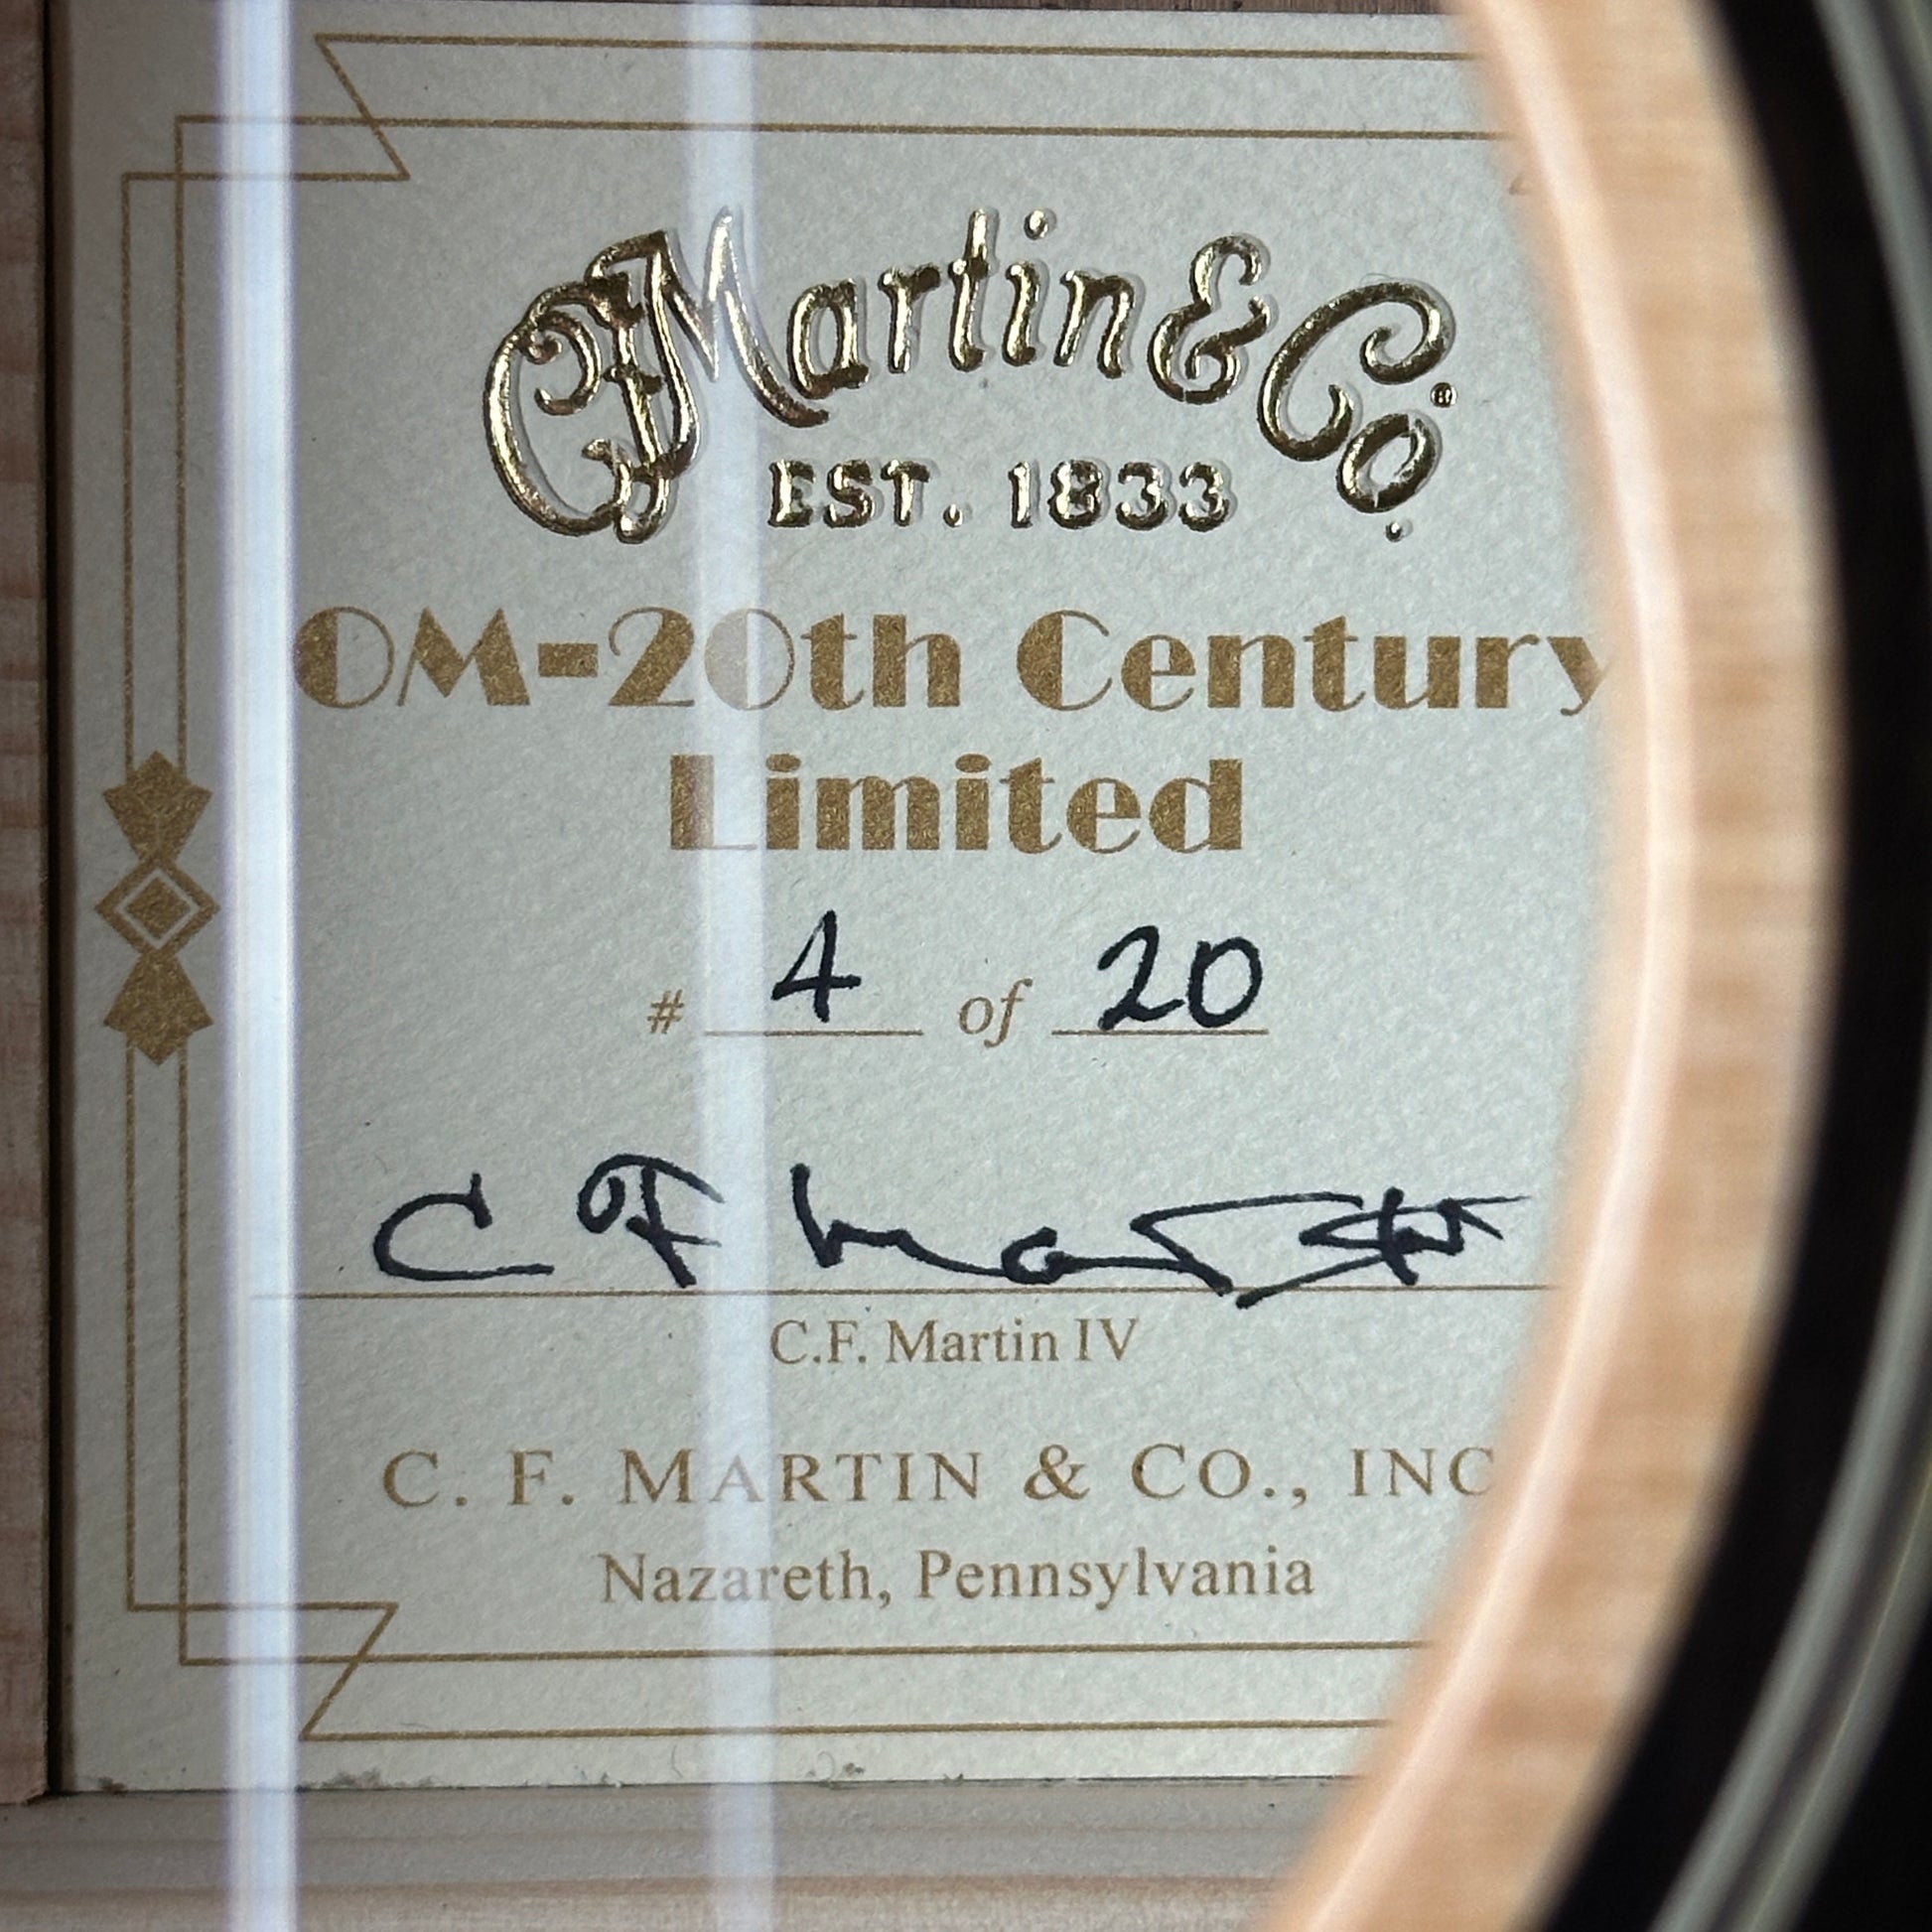 Serial number for Martin OM 20th Century Limited.